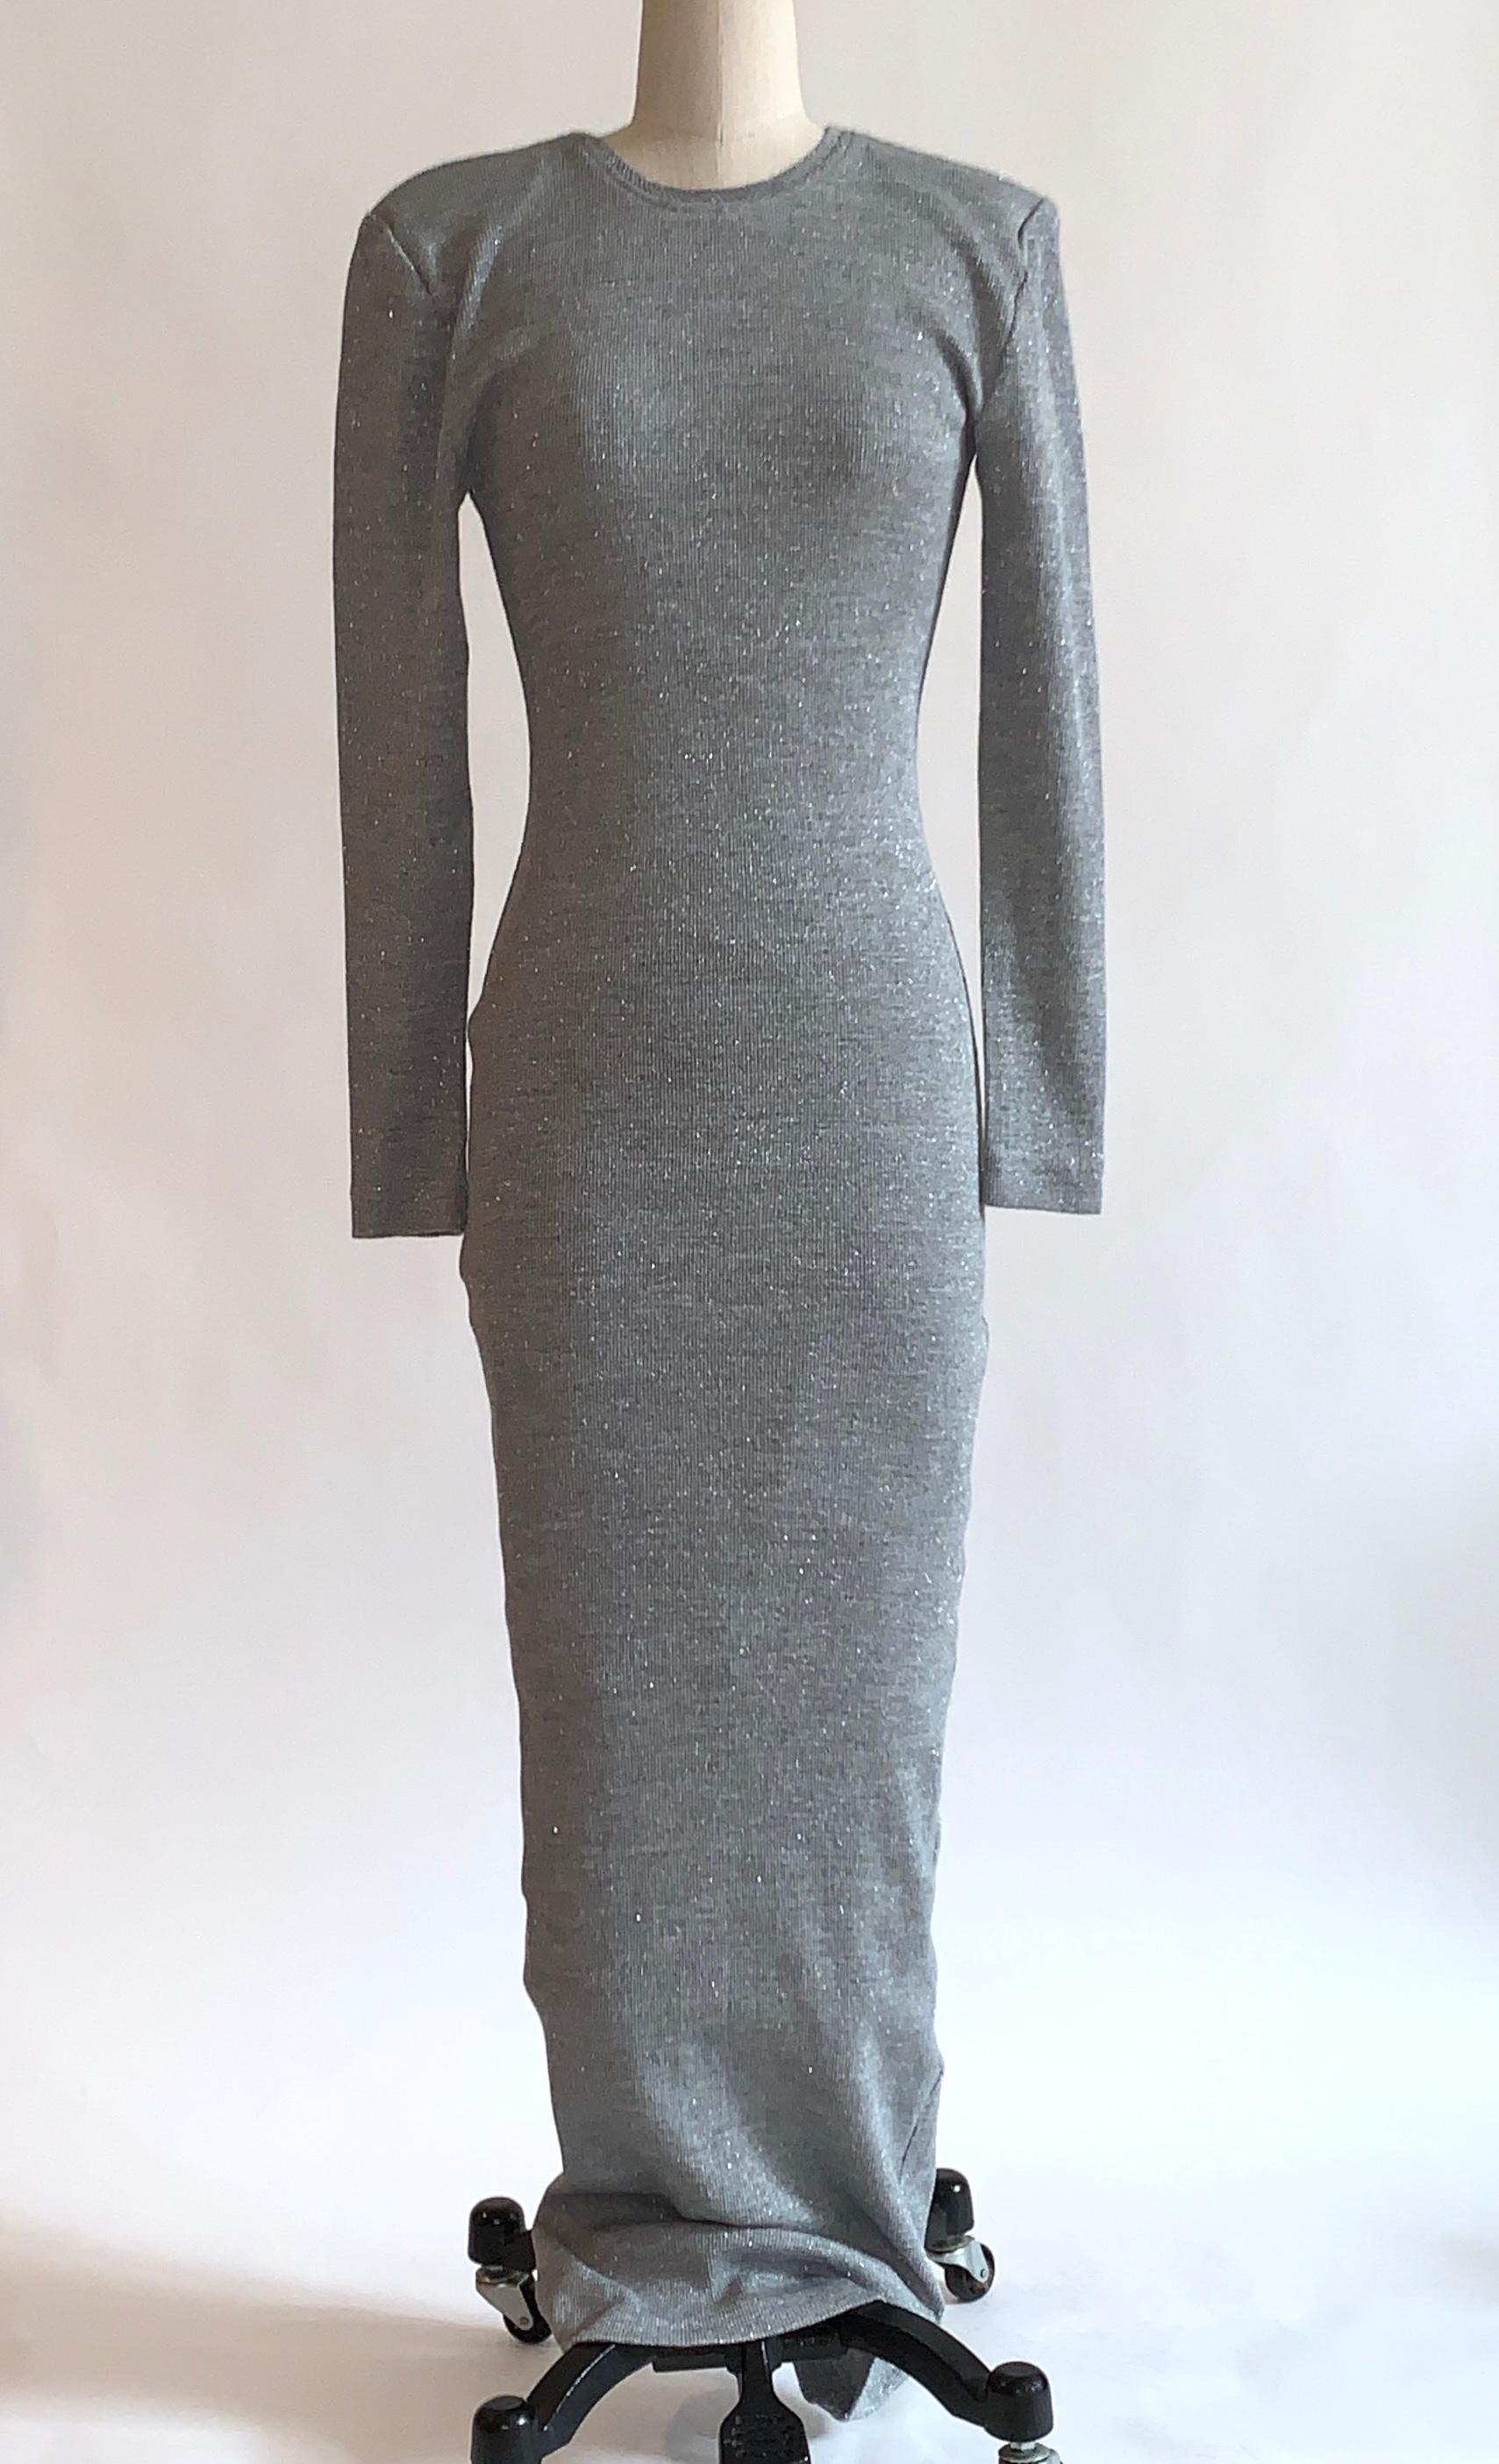 Patrick Kelly metallic silver grey thin rib knit maxi length sweater dress. Light grey with tiny specks of silver throughout. Long sleeves, light padding at shoulders. Pull on. Purchased from an auction of items from the Atelier of Patrick Kelly. 